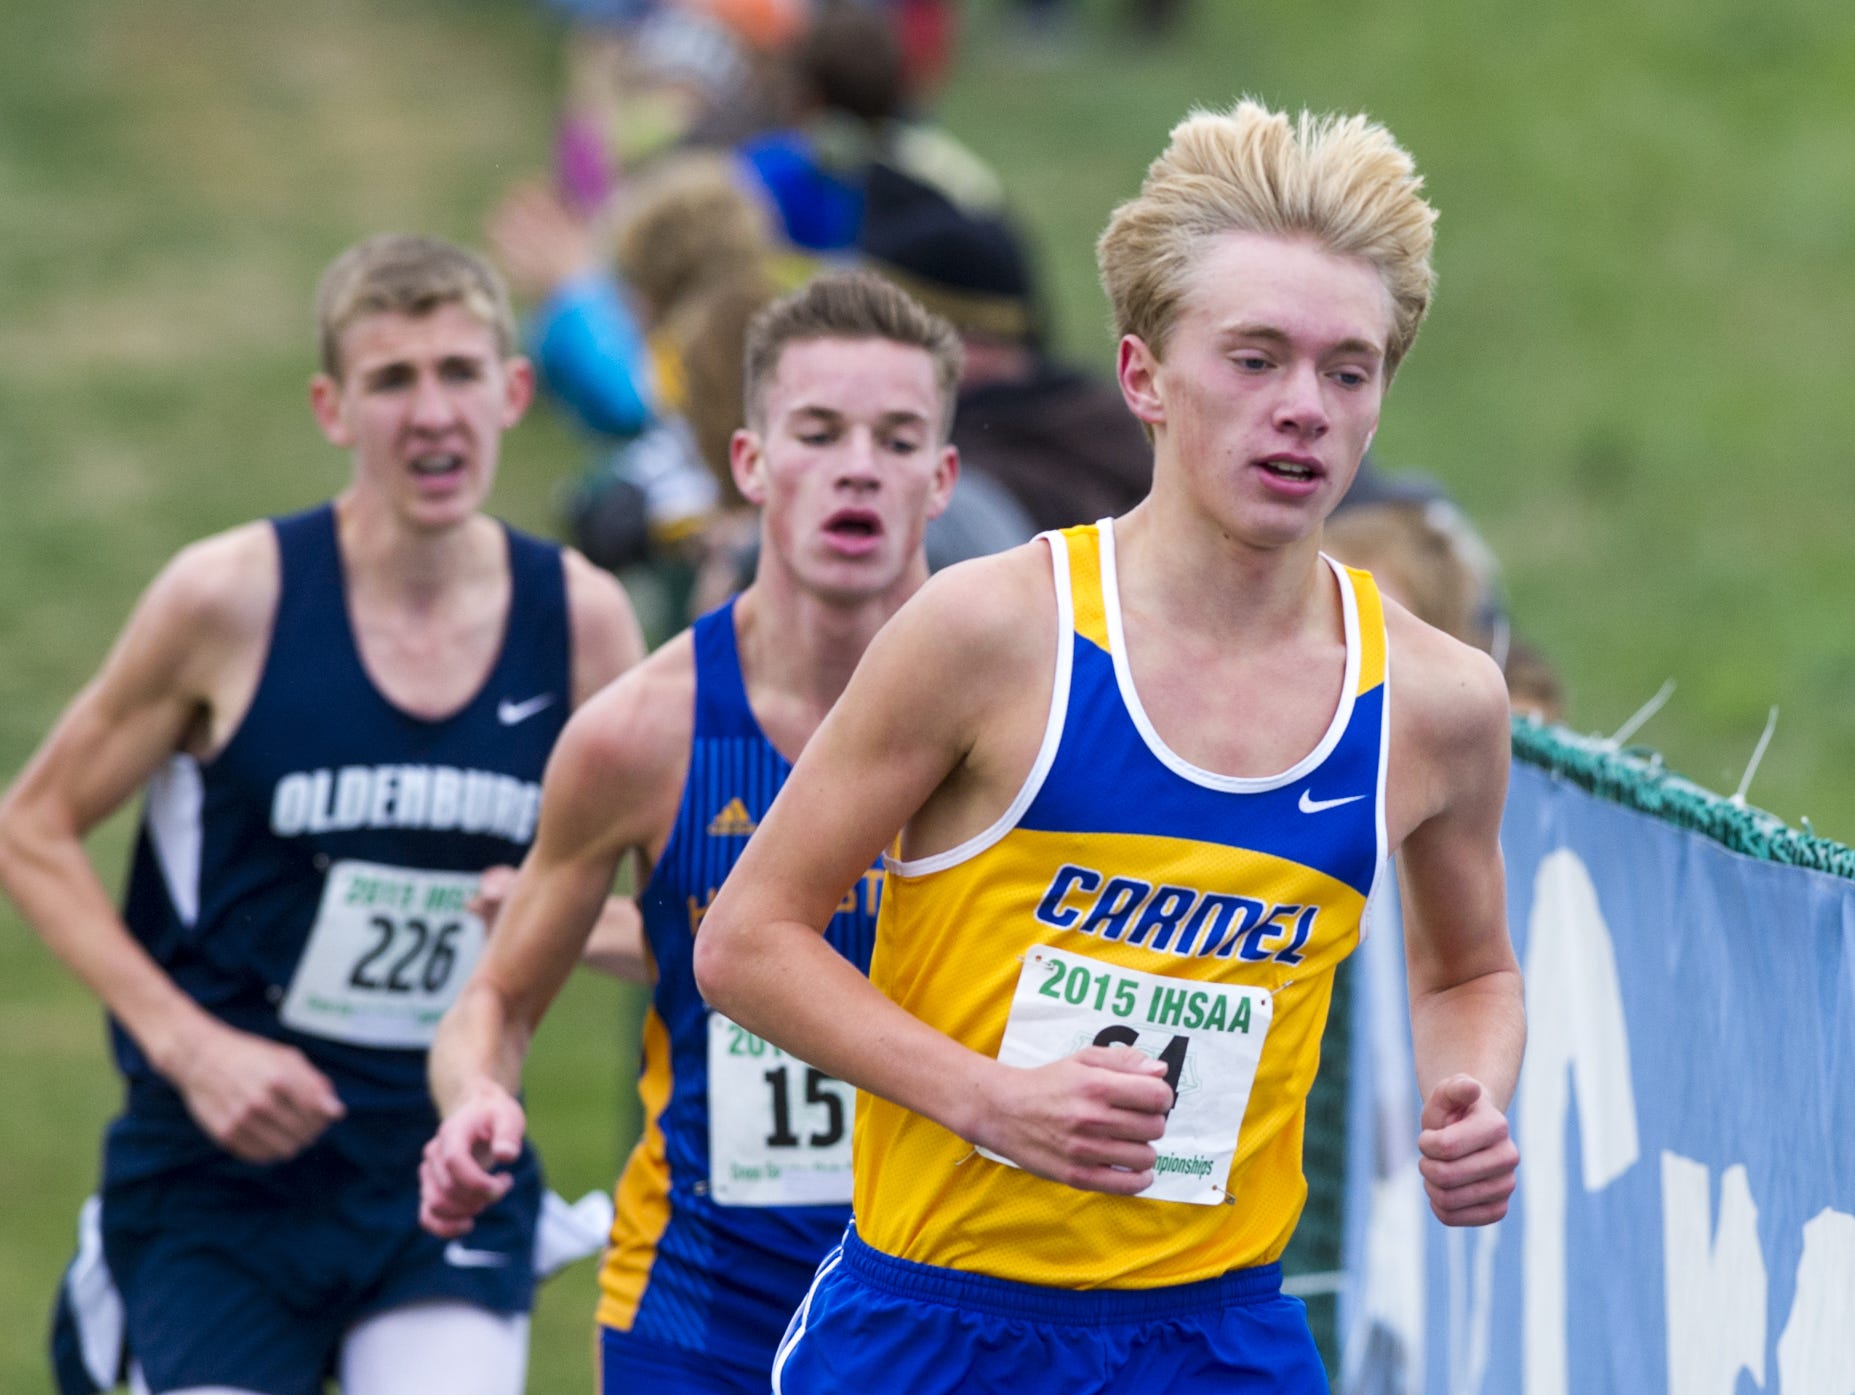 Carmel's Ben Veatch is eyeing the rare "distance double."